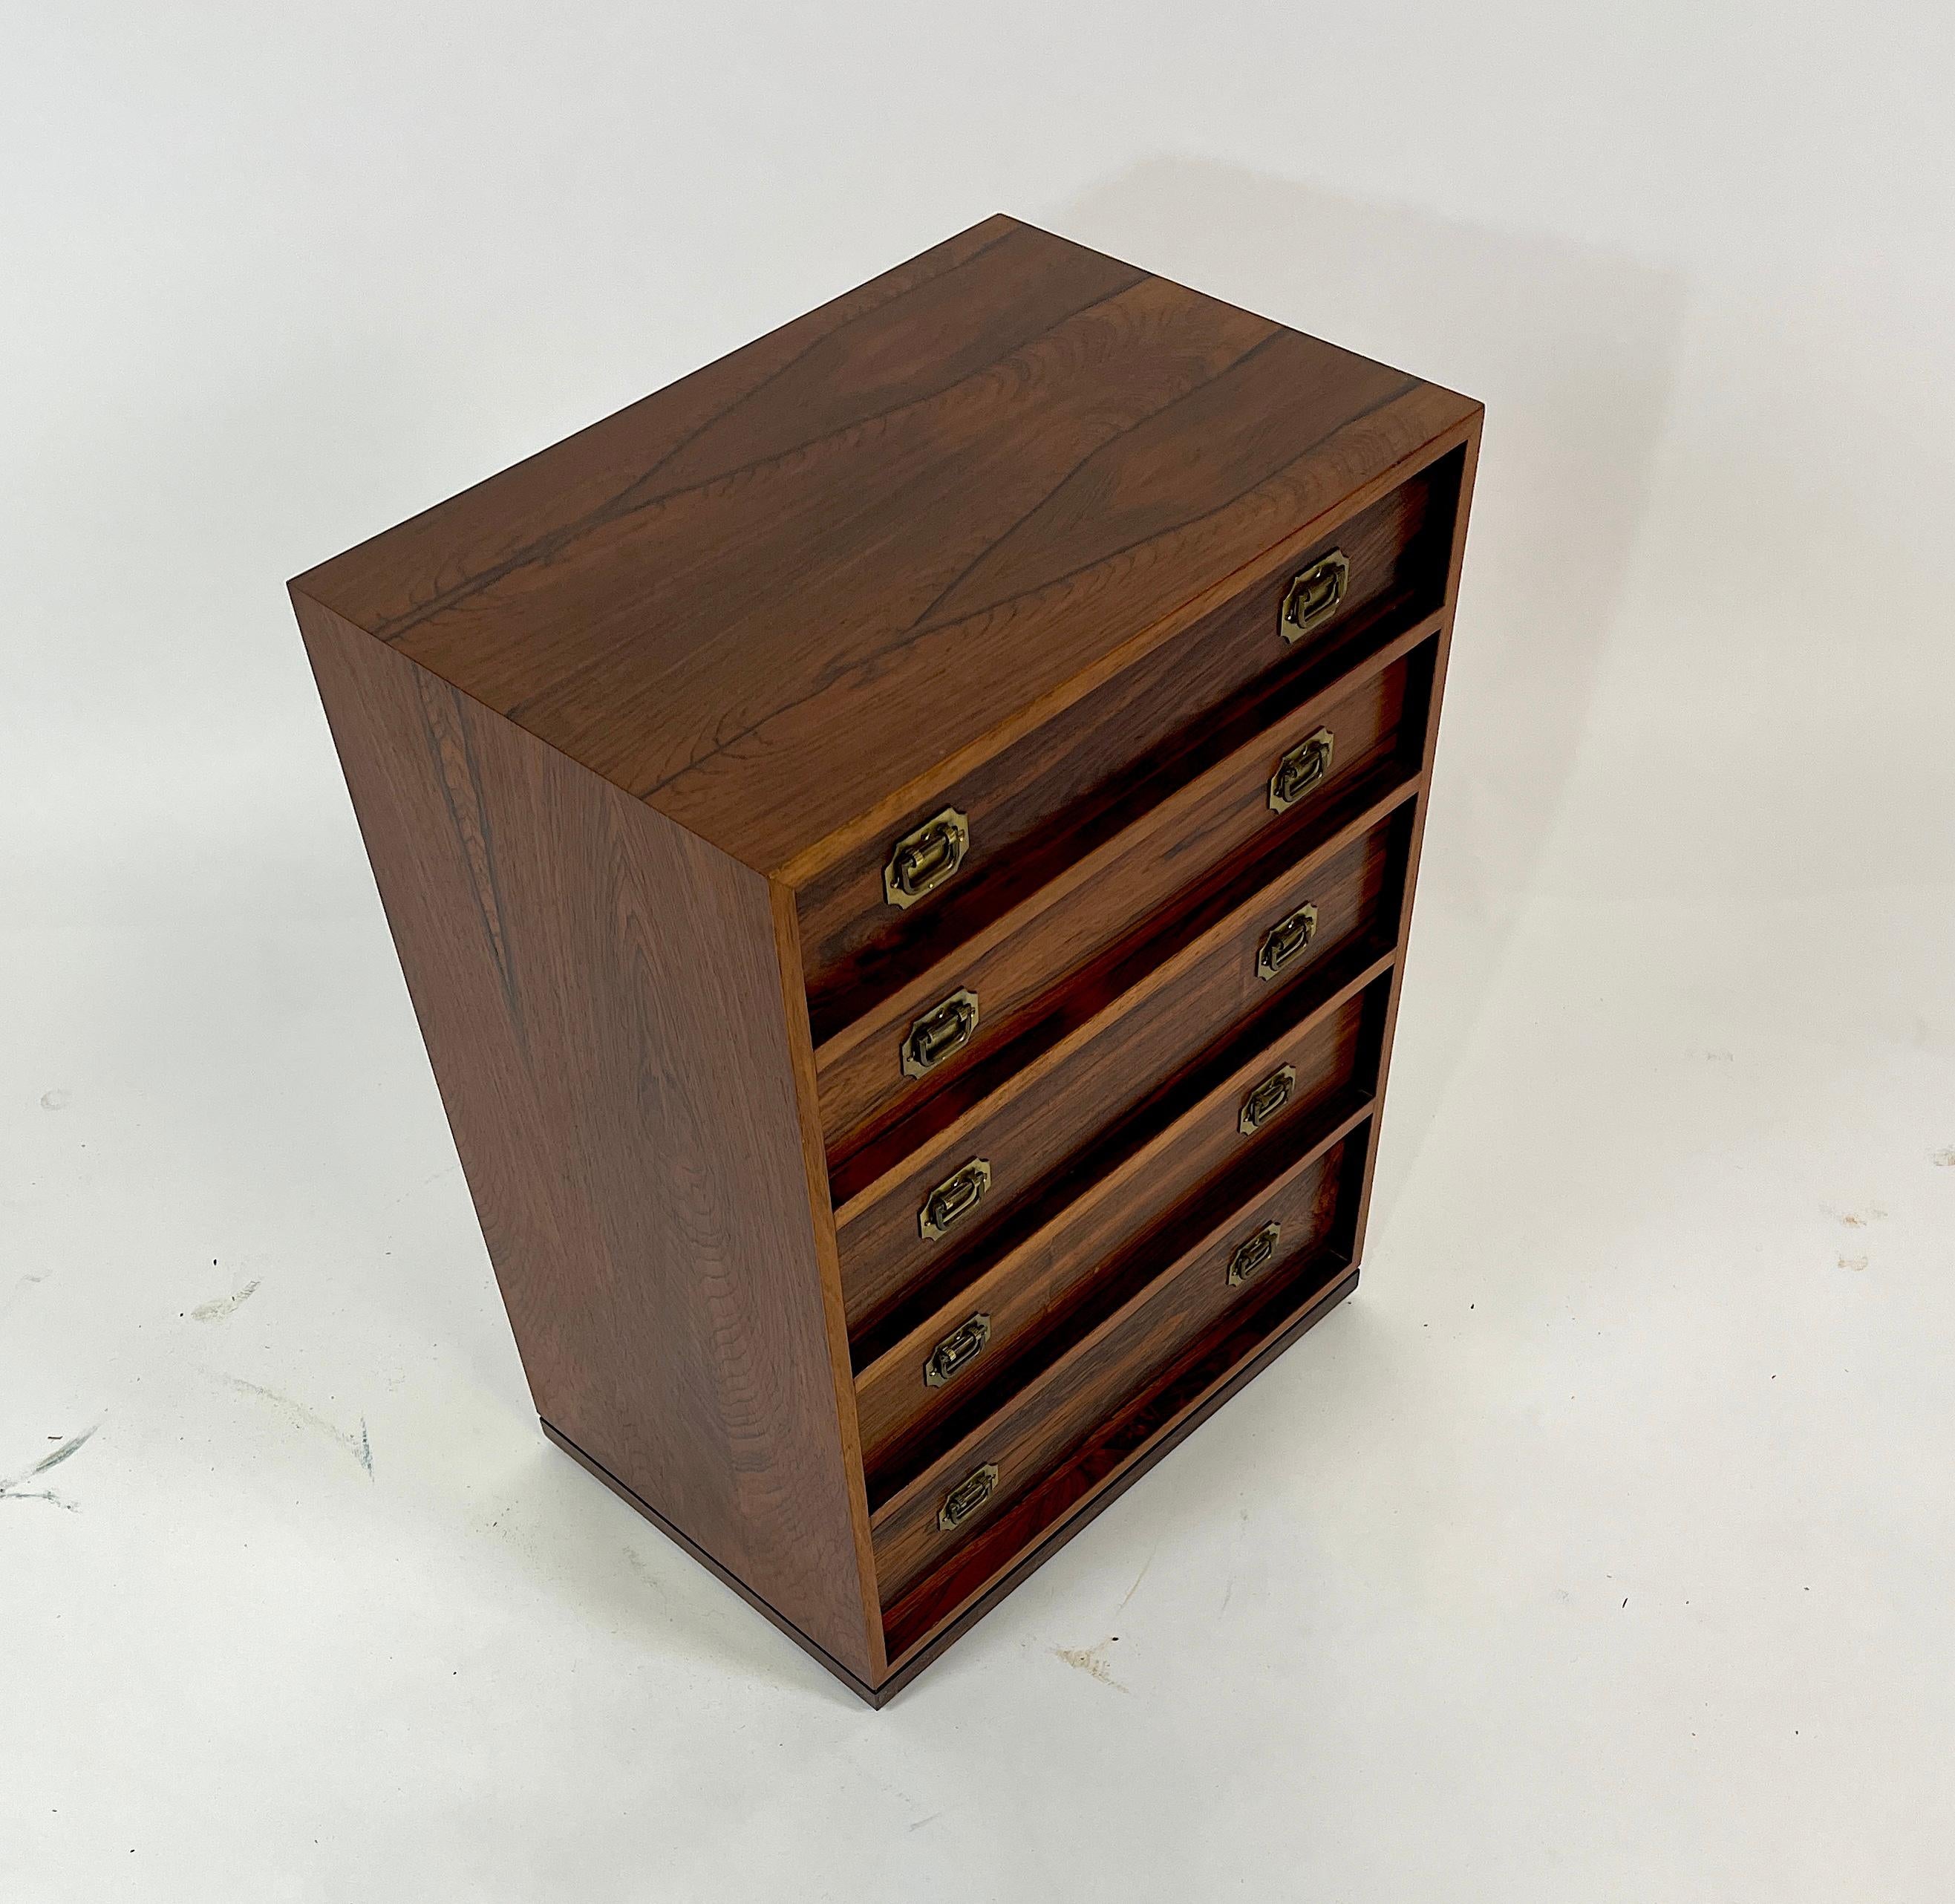 Danish Henning Korch Rosewood Campaign Jewelry Chest of Drawers from Denmark